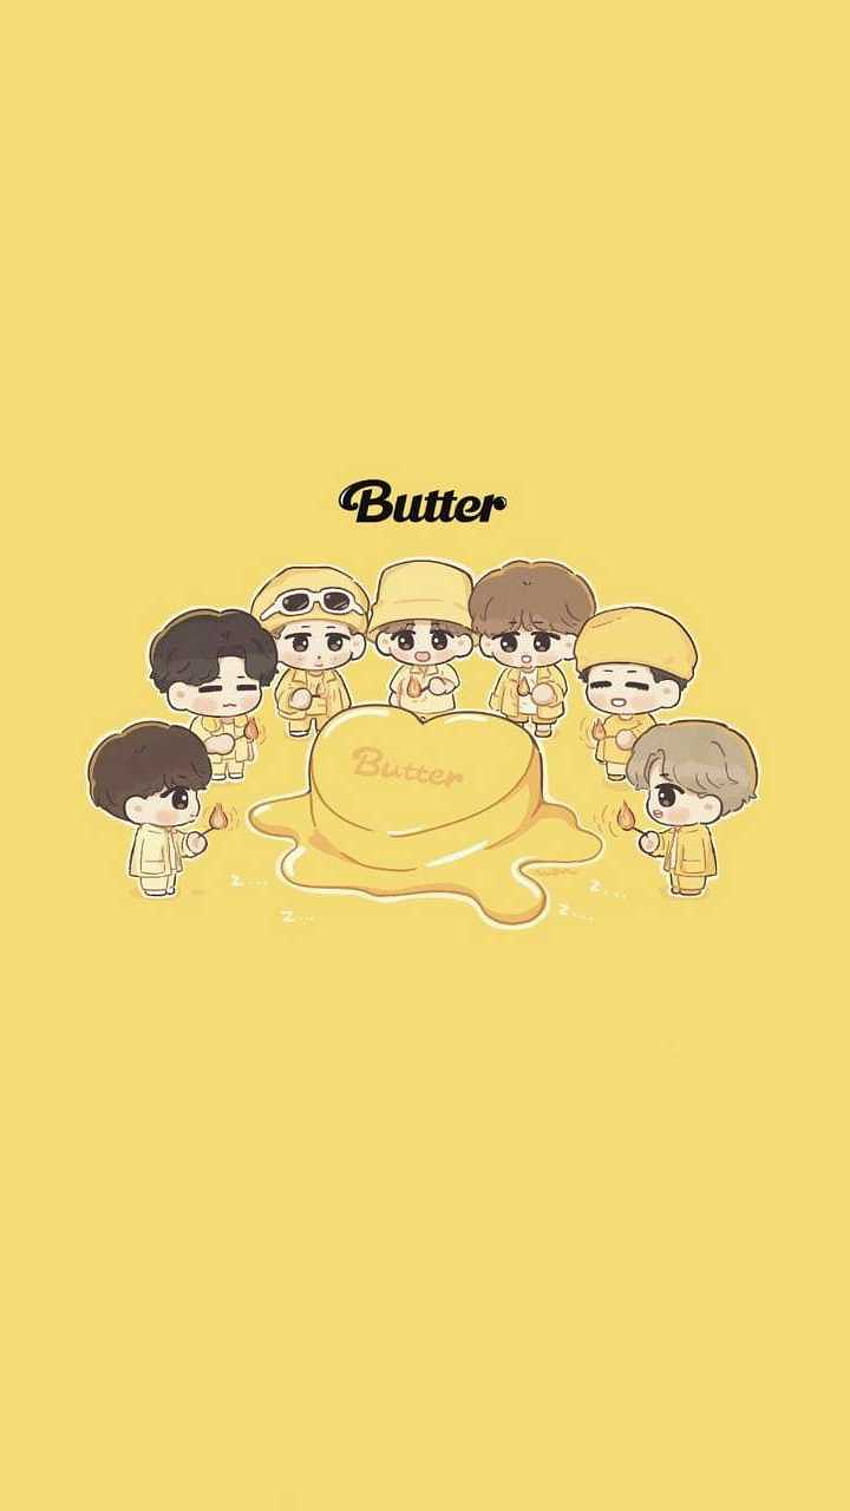 5120x2880px, 5K Free download | BTS Butter - Awesome, Jungkook Butter ...